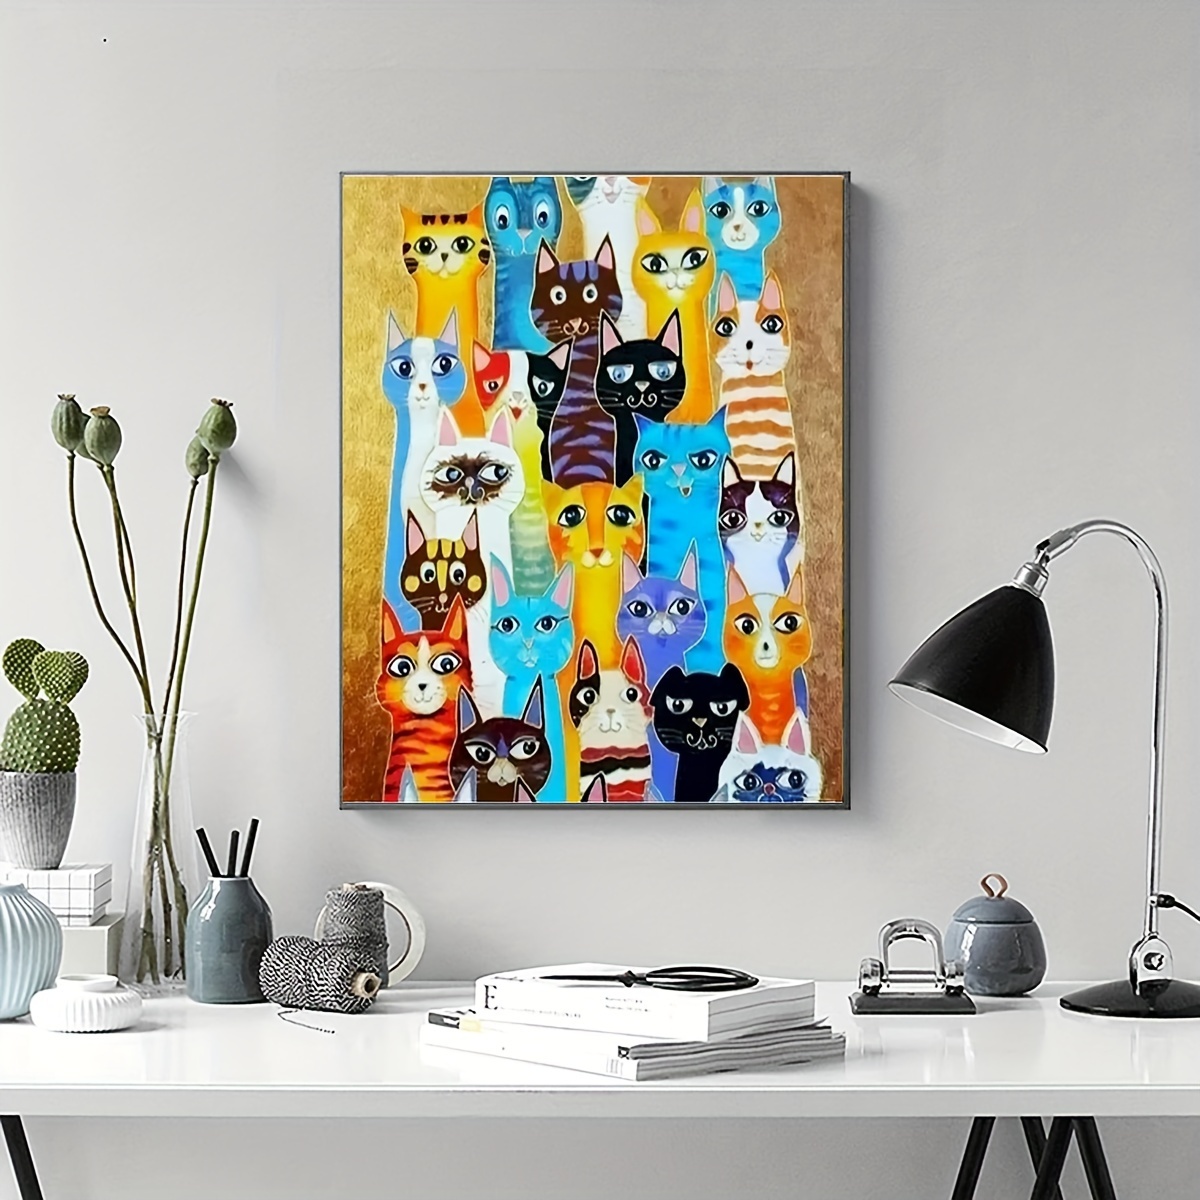 

Diy Paint By Numbers Kit For Adults, Cartoon Cat Art Canvas Painting Set - Relaxing Creative Activity, Perfect Holiday Gift For Home Wall Decor